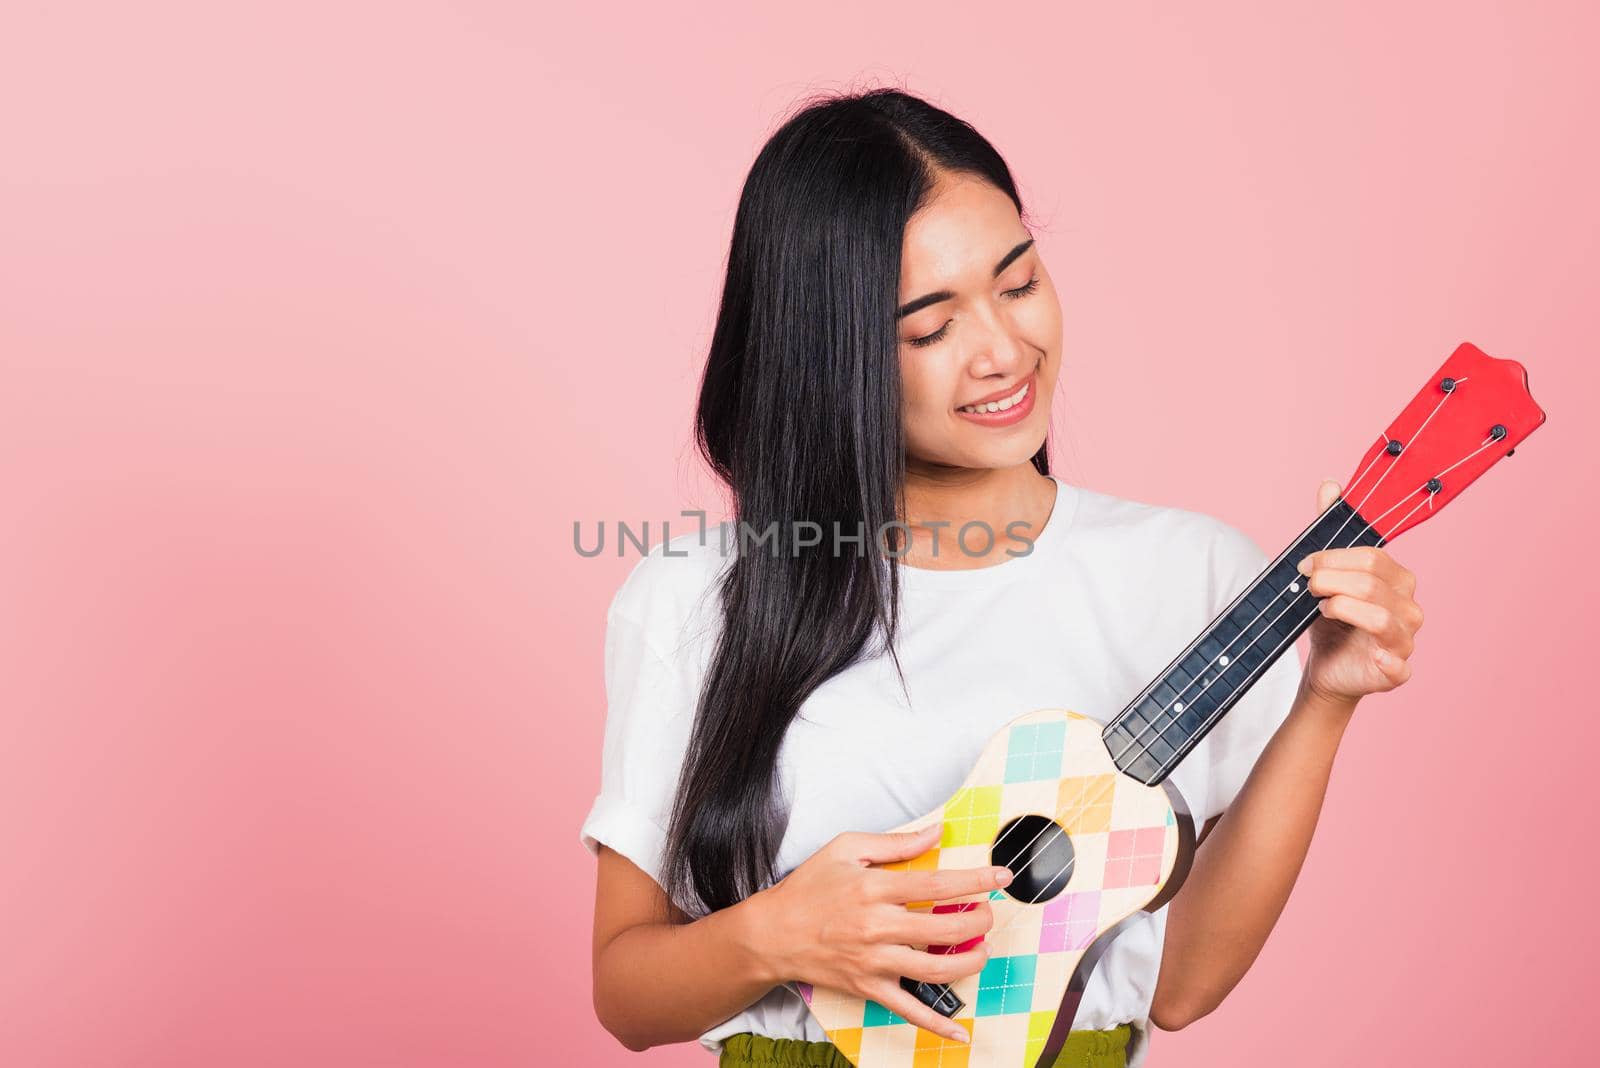 woman teen confident smiling face hold acoustic Ukulele guitar by Sorapop